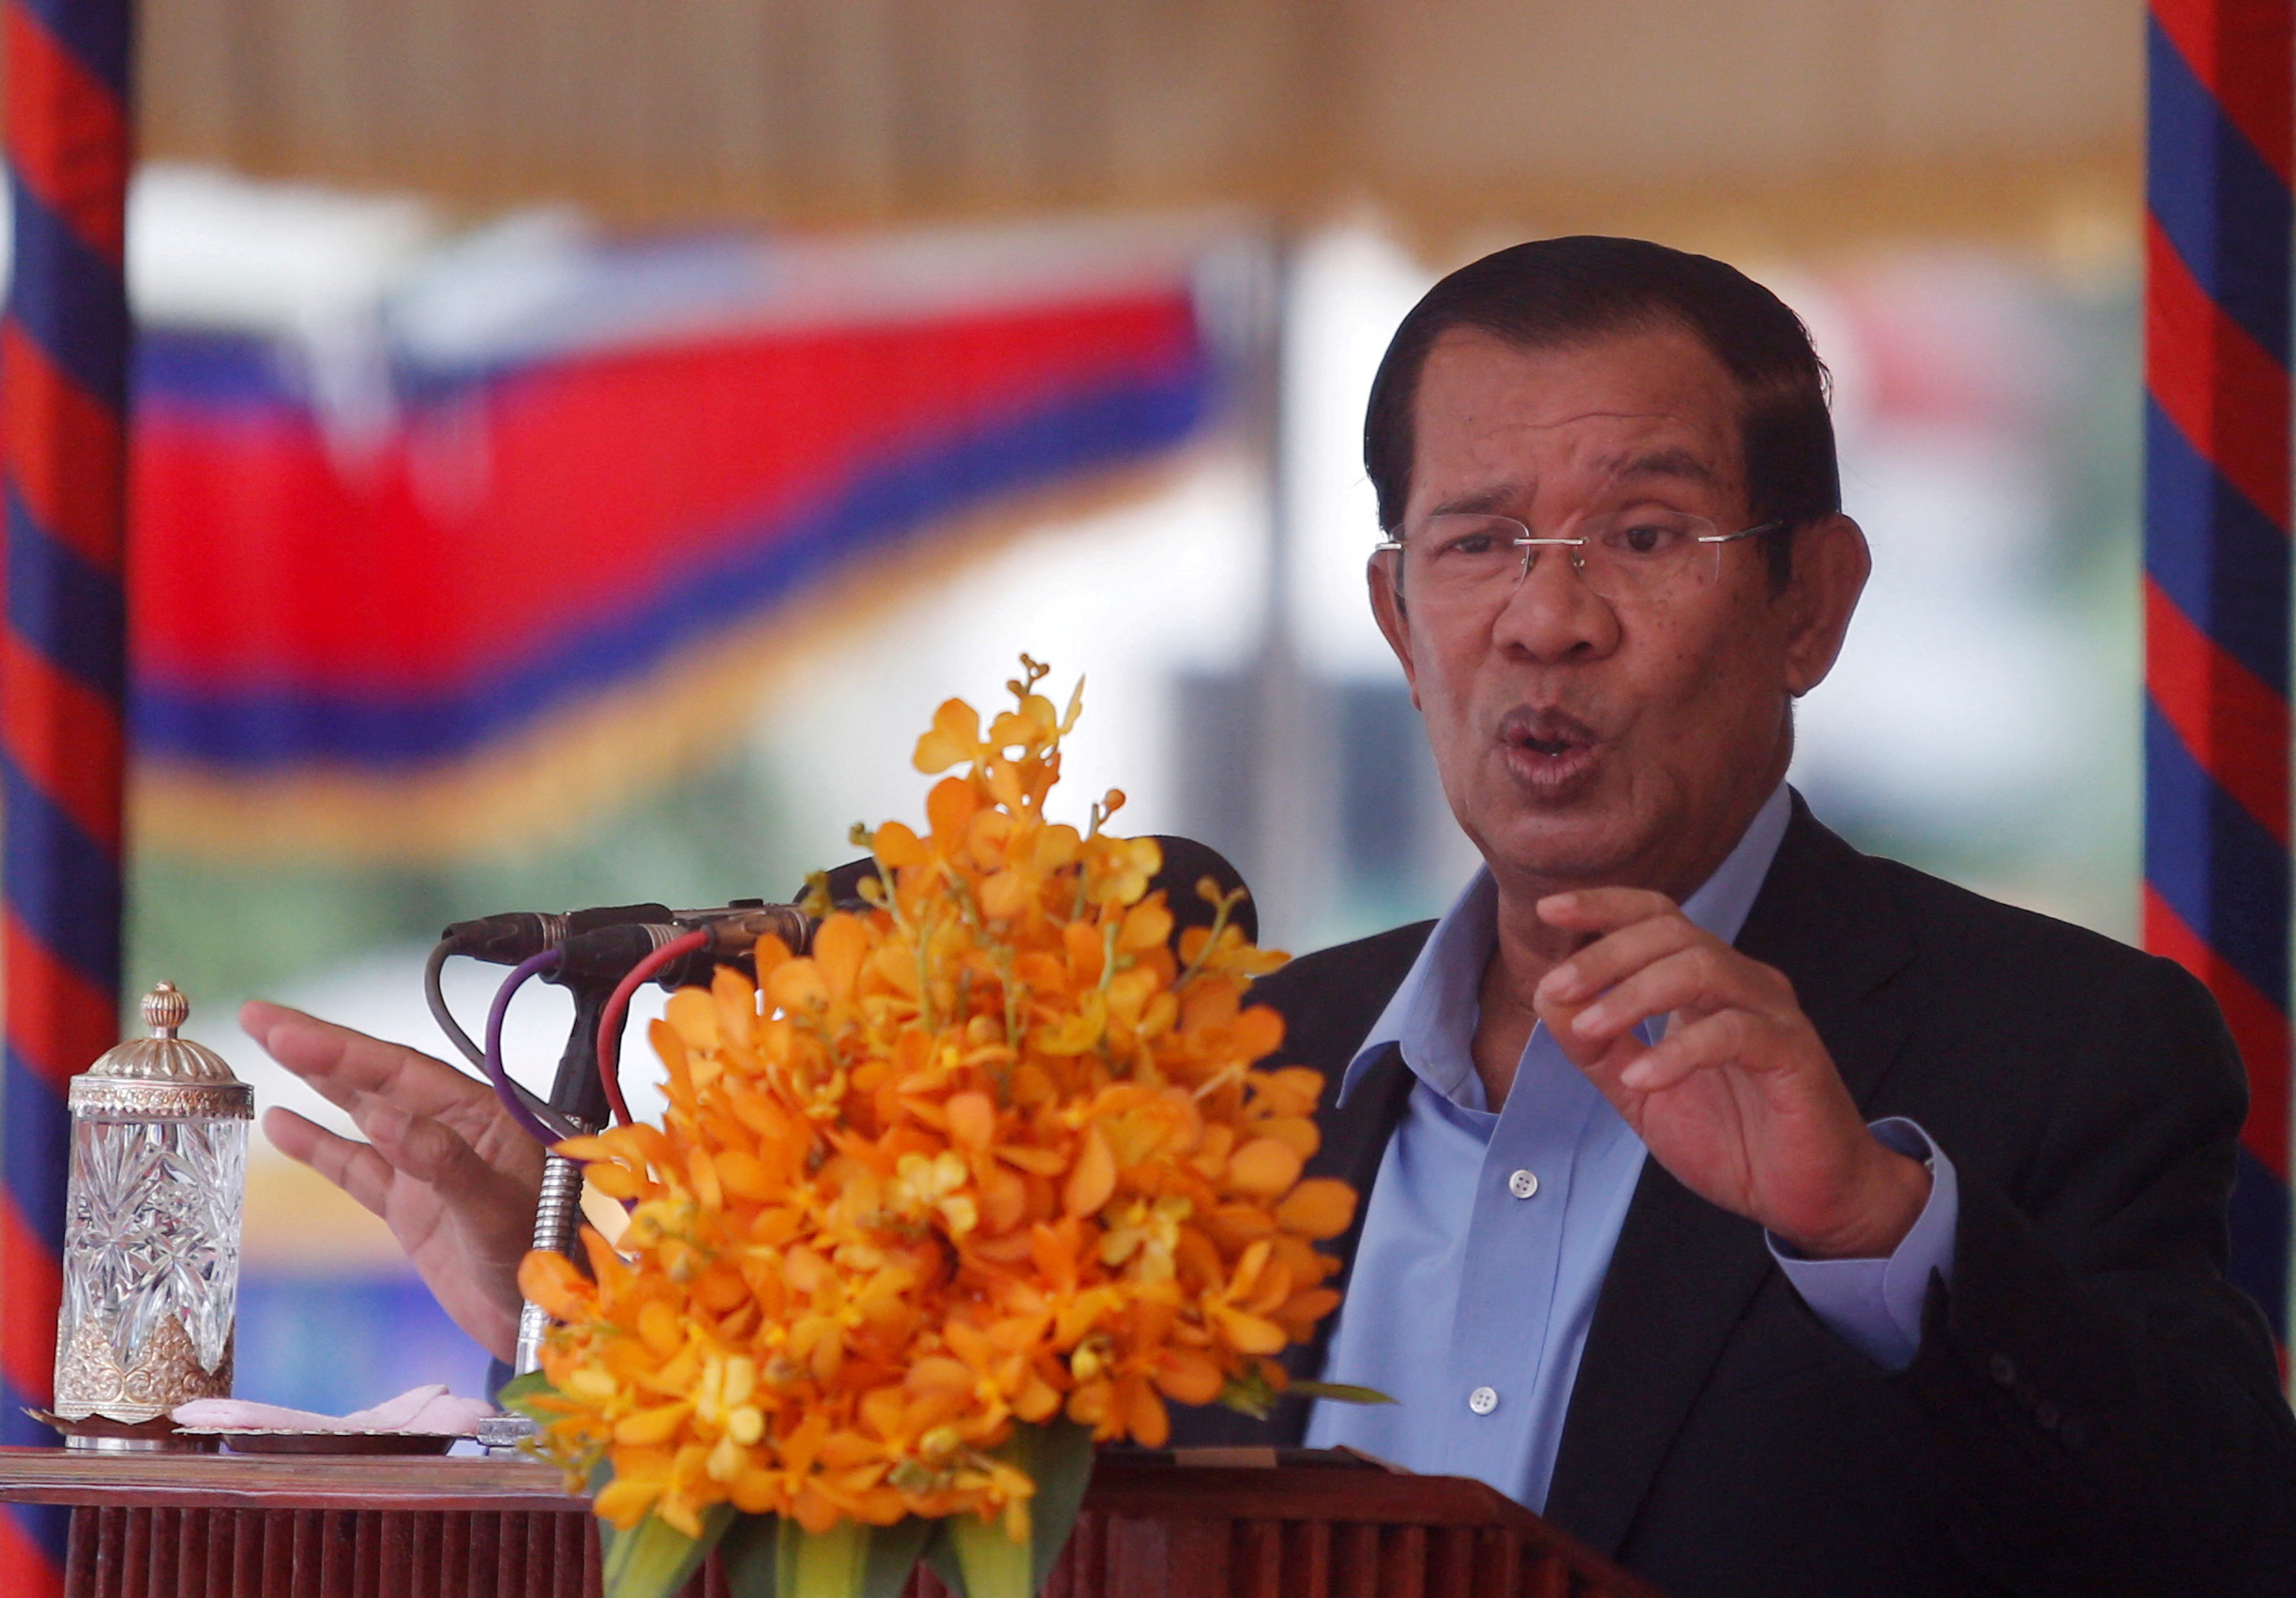 Cambodia's Prime Minister Hun Sen speaks during a groundbreaking ceremony of the Project for Flood Protection, donated by Japan, in Phnom Penh